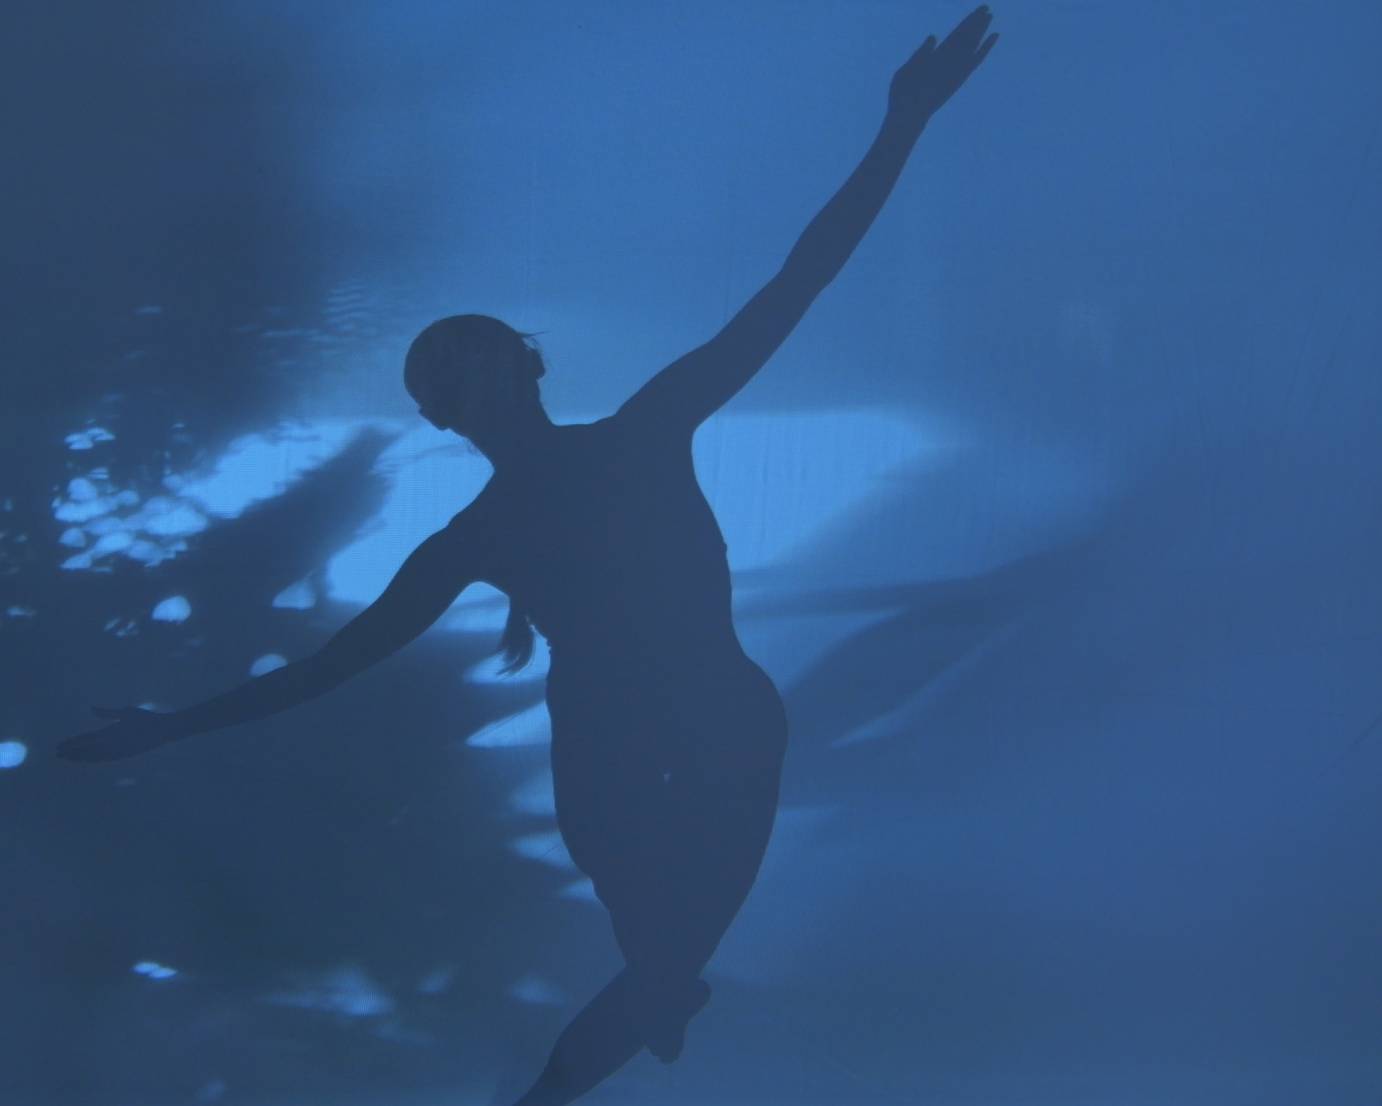 Woman seen in silhouette against a blue background